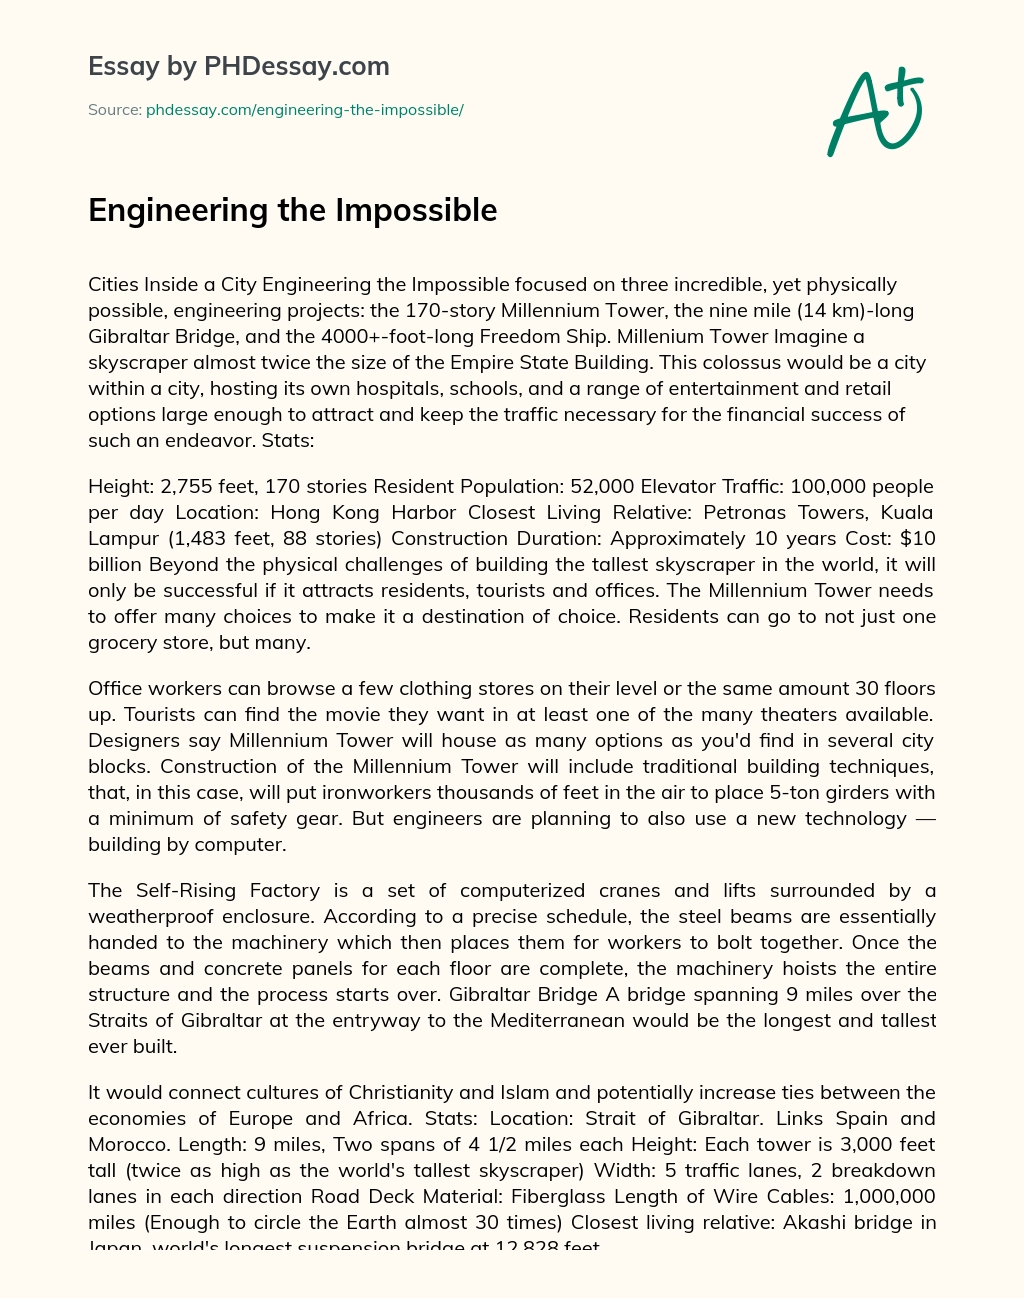 Engineering the Impossible essay